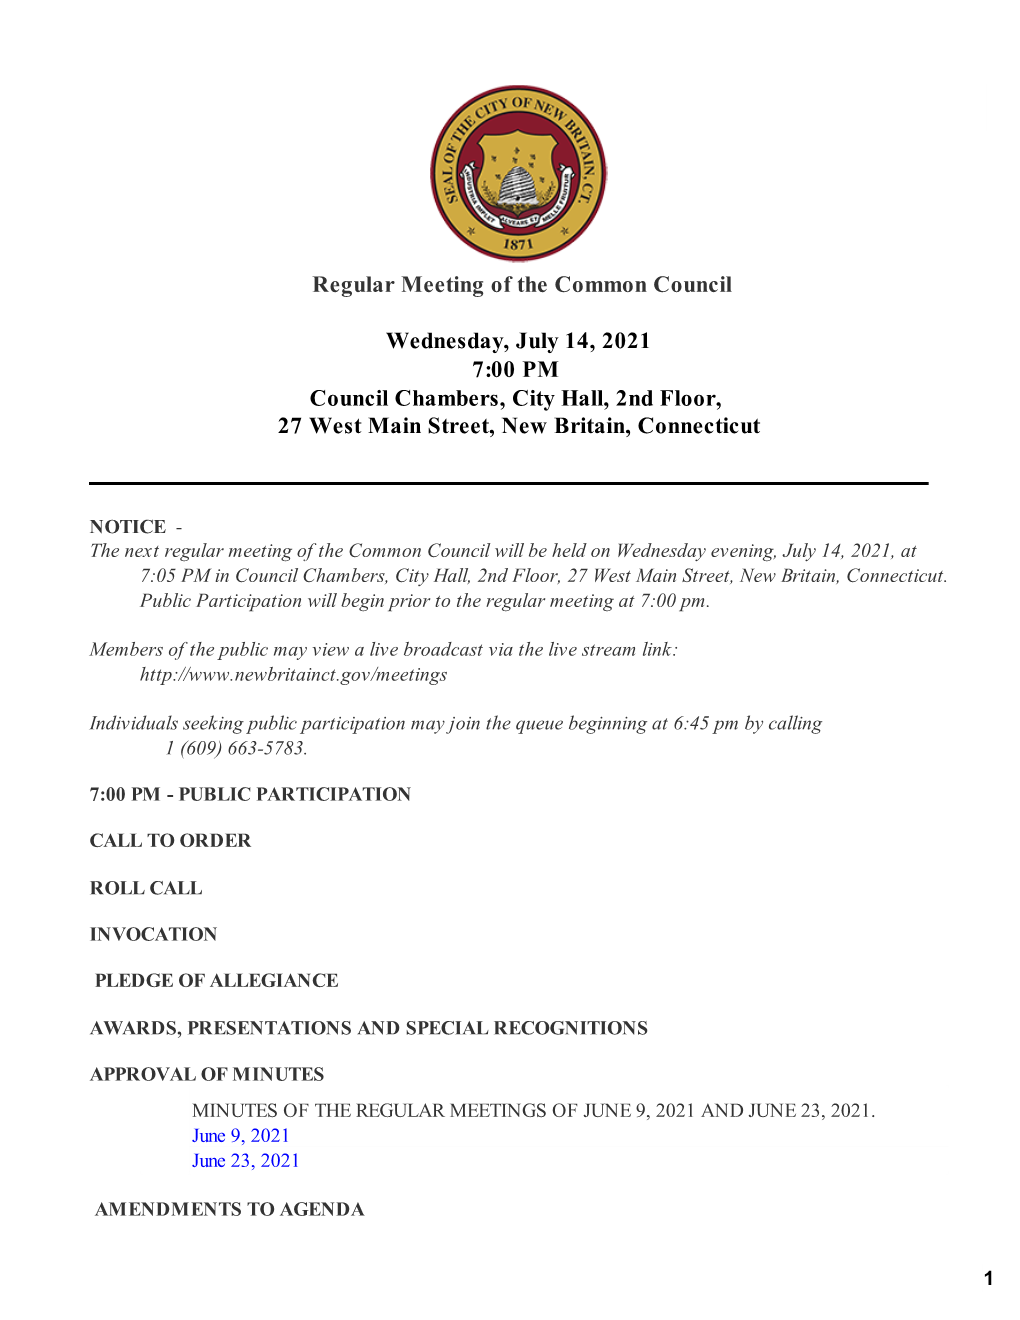 Regular Meeting of the Common Council Wednesday, July 14, 2021